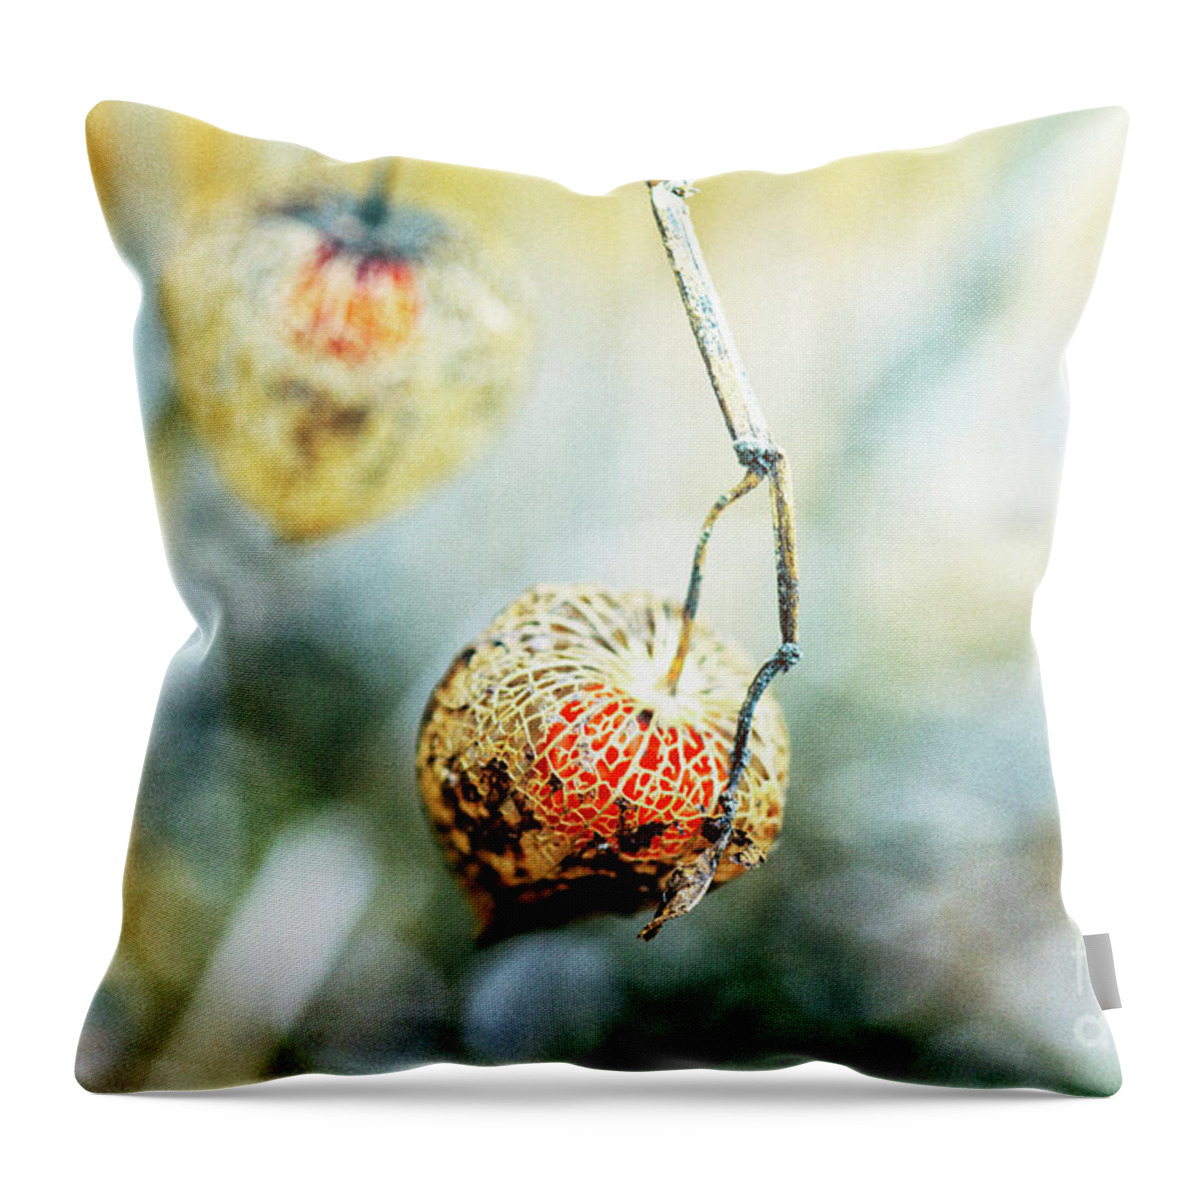 Home decor for #mothersday Give a #gift of #art fineartamerica.com/featured/magic… #buyintoart #homedecor #pillows